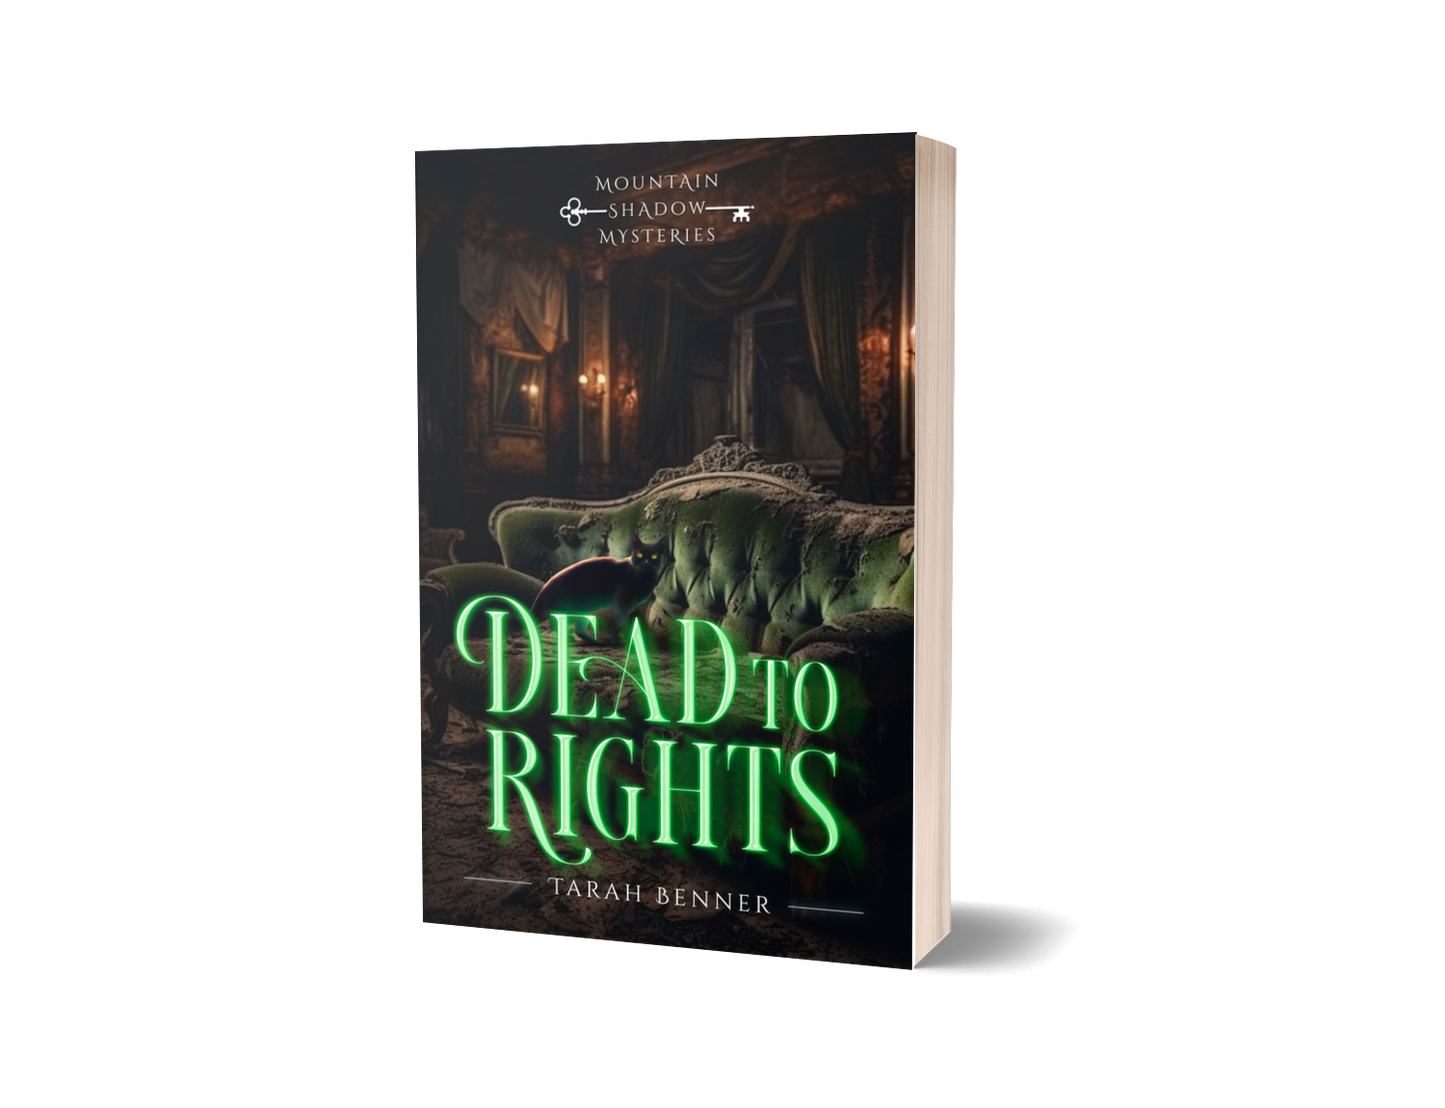 Dead to Rights: Mountain Shadow Mysteries Book 2 (Paperback Edition)